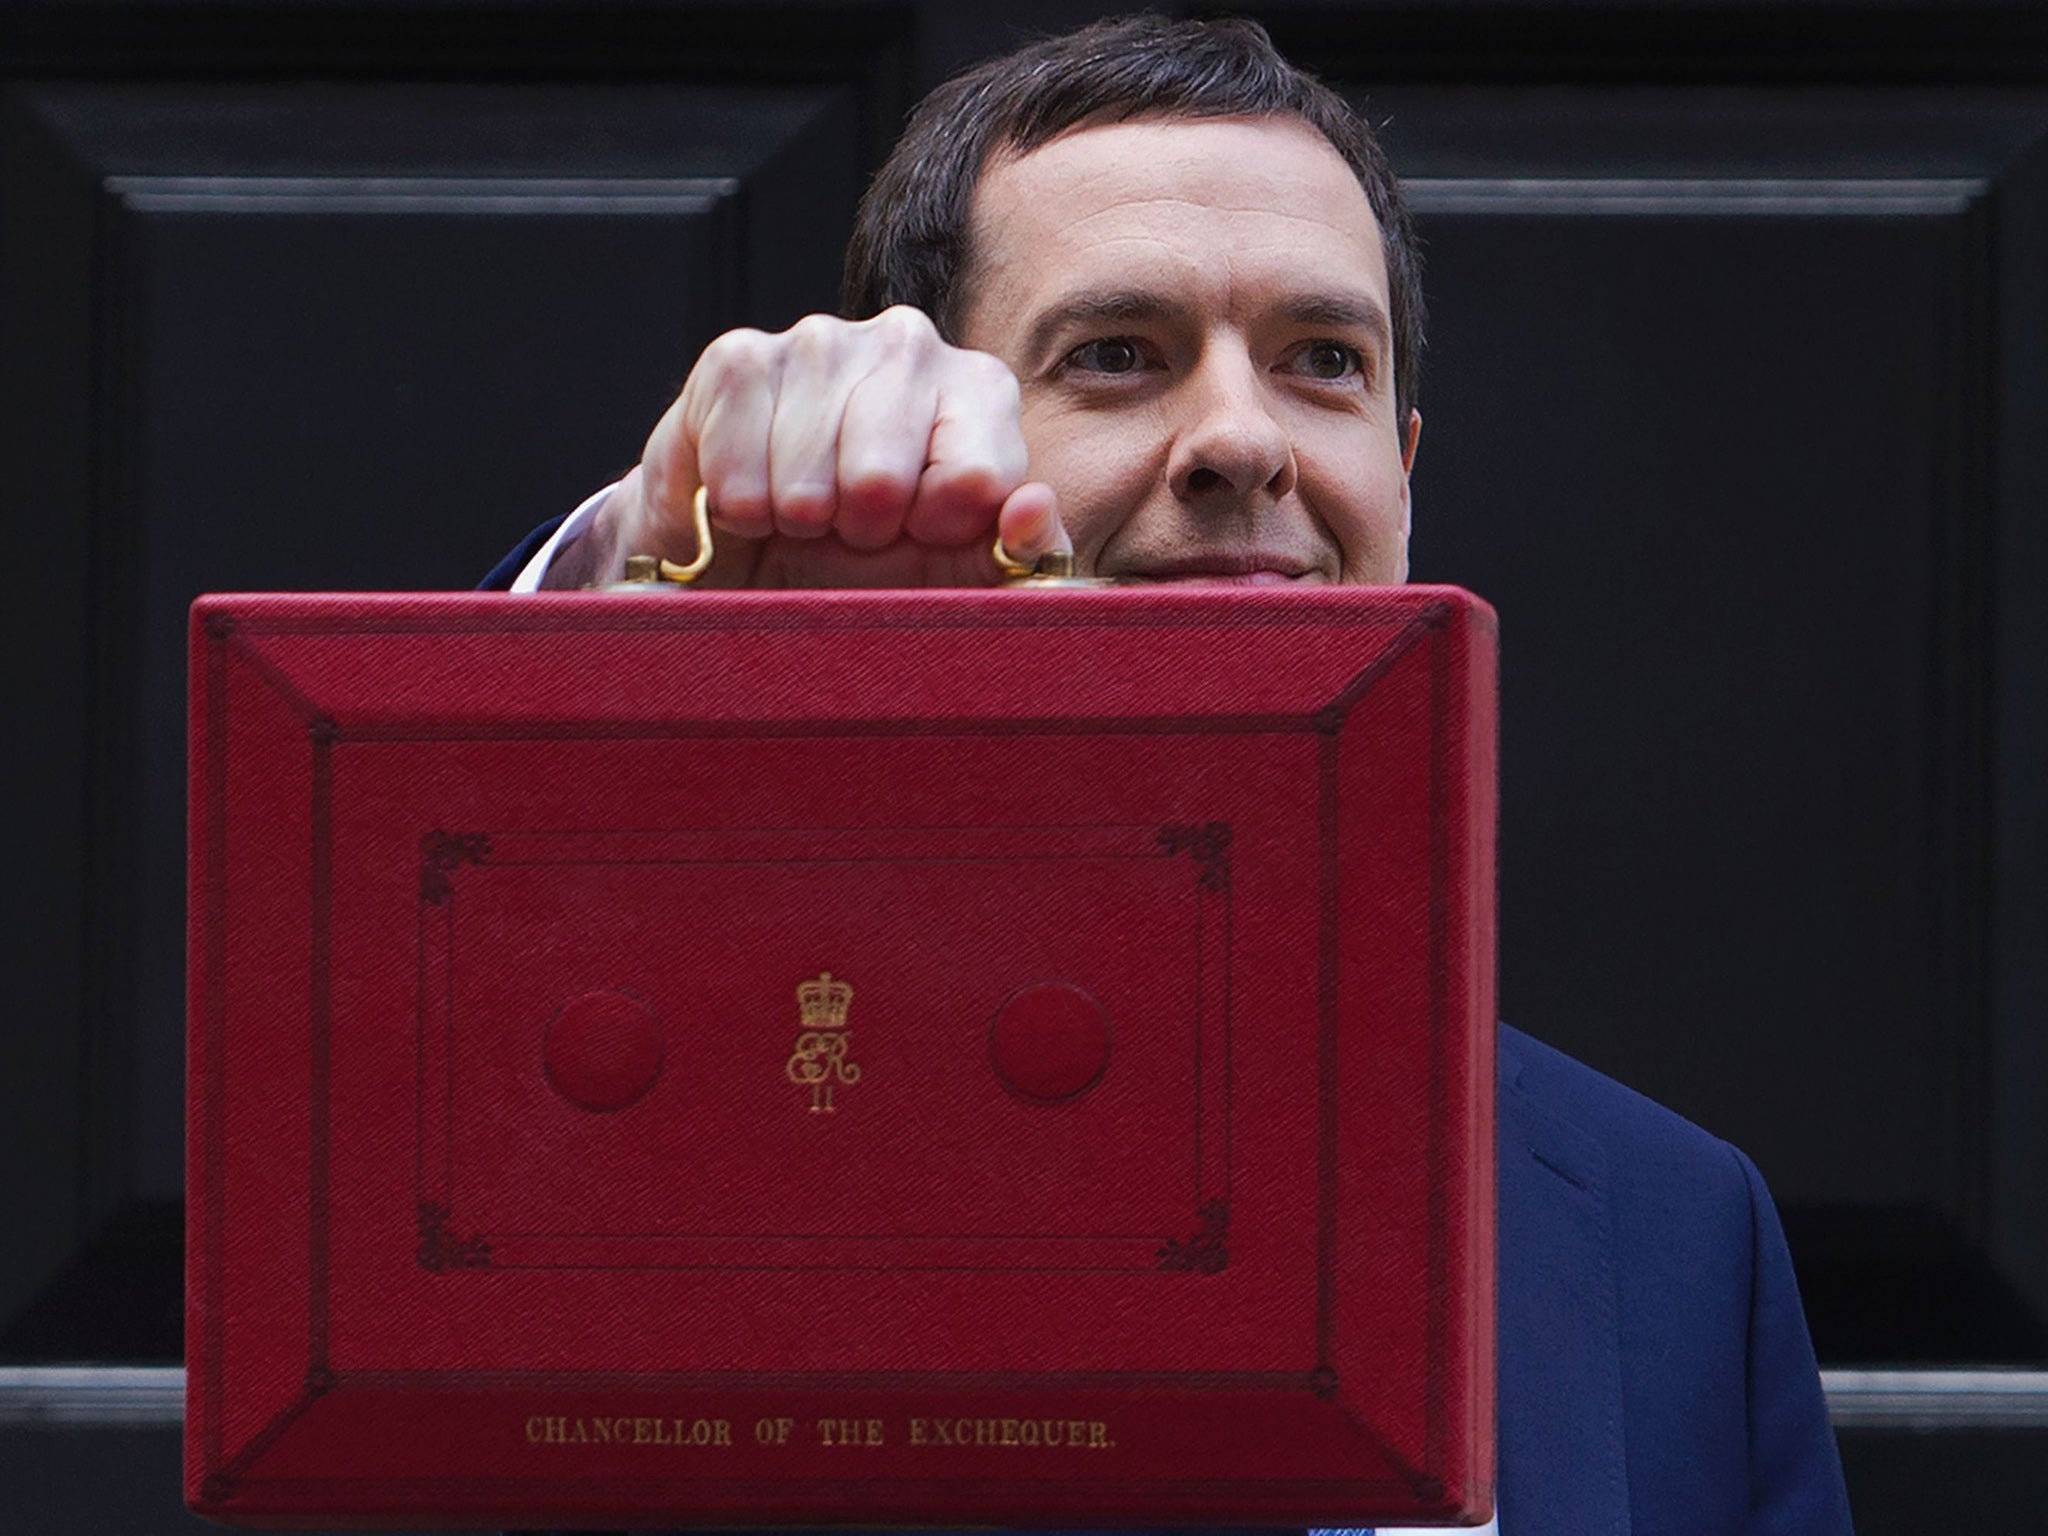 British Finance Minister George Osborne poses for pictures with the Budget Box as he leaves 11 Downing Street